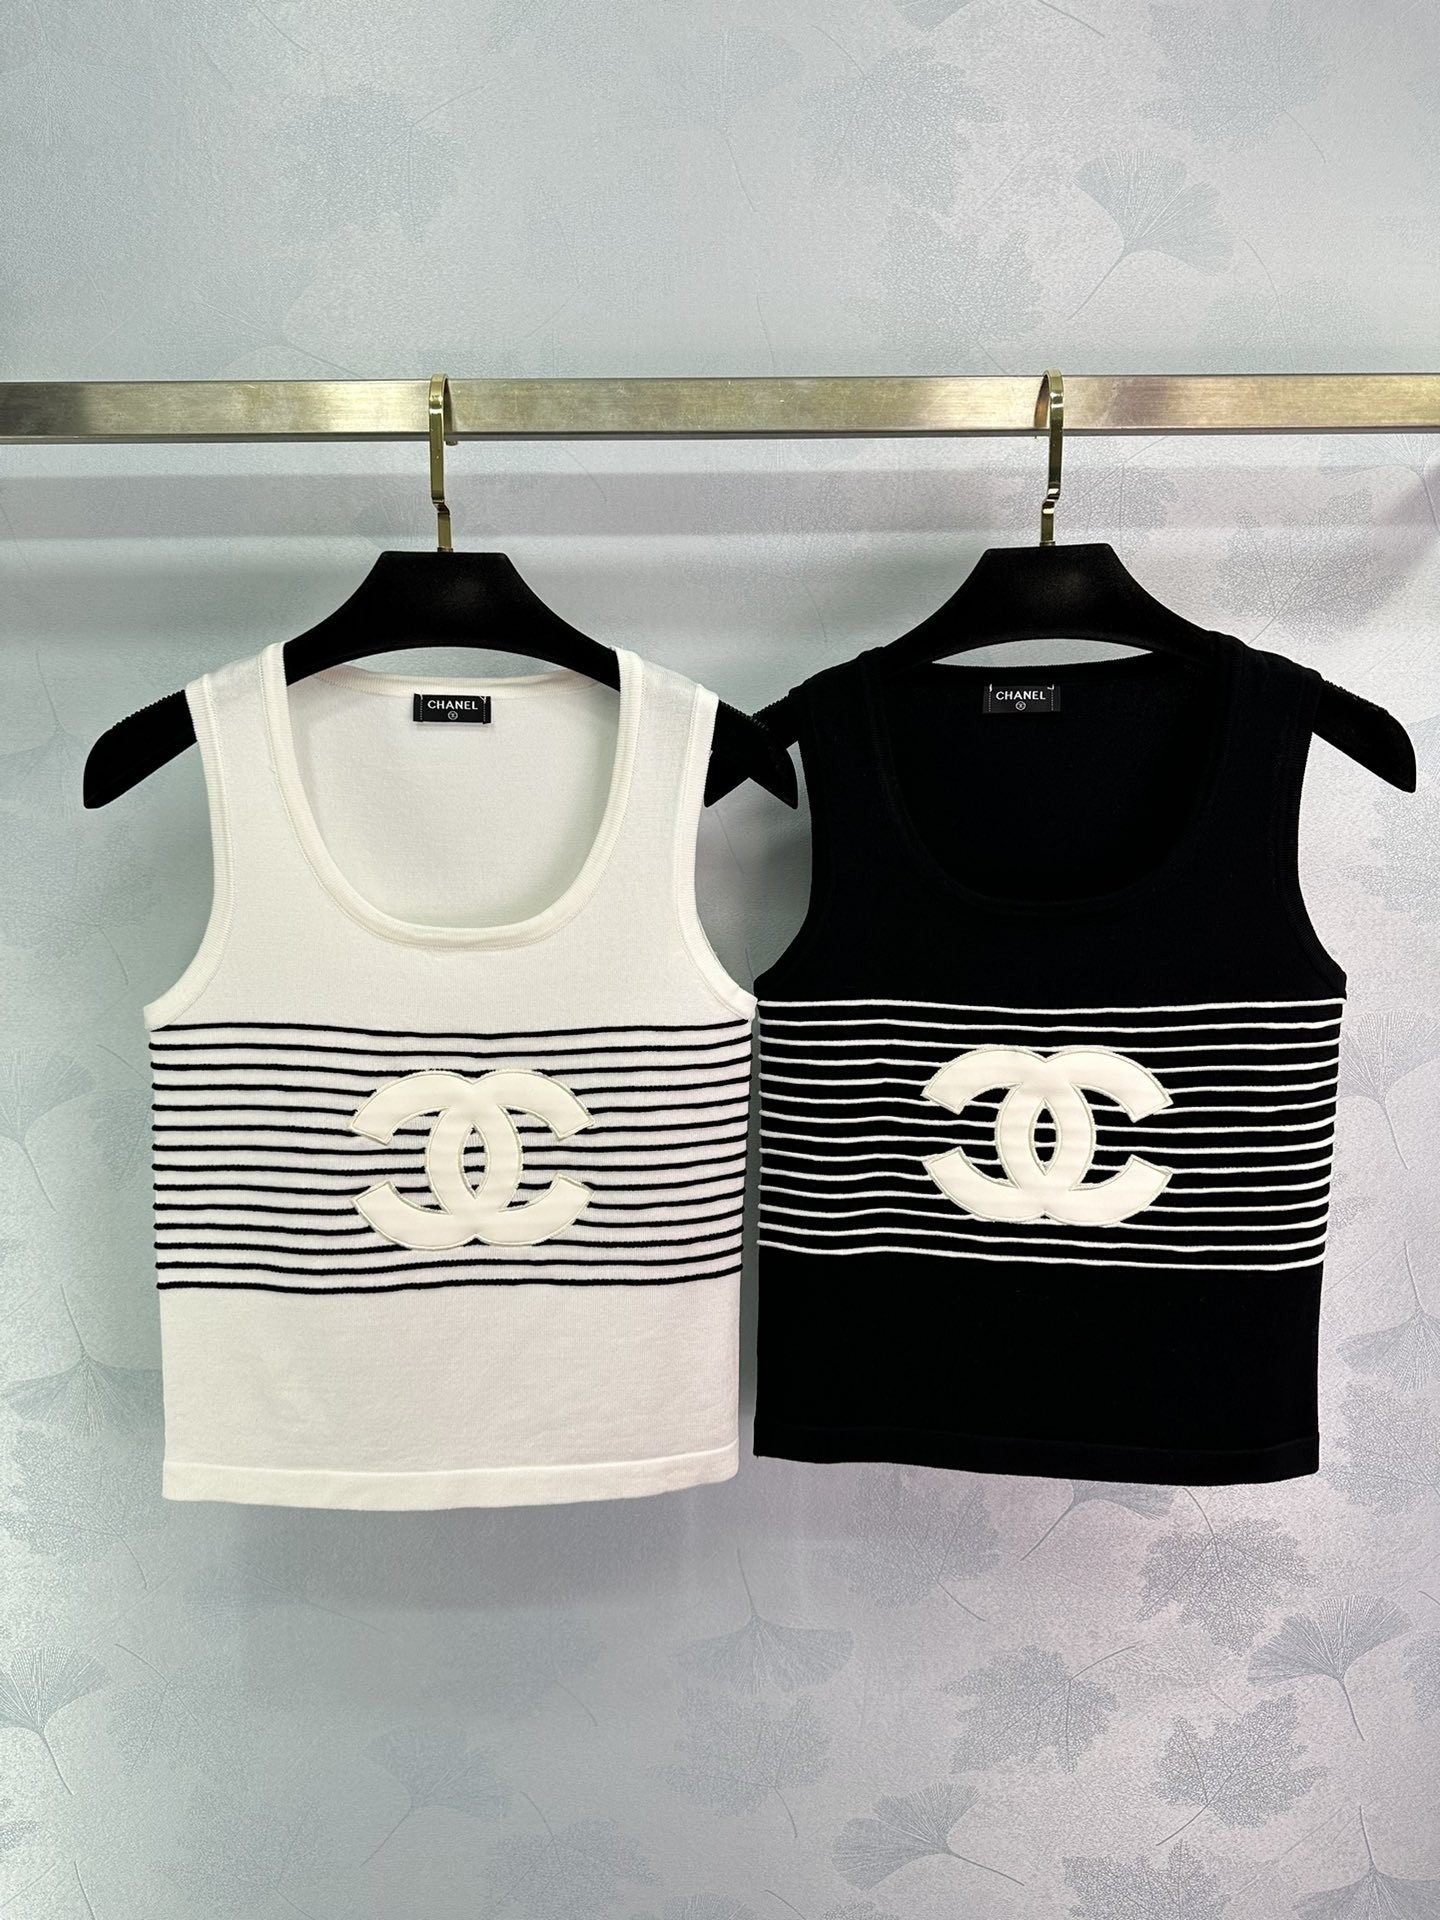 Chanel Clothing Tank Tops&Camis Black White Knitting Spring Collection Fashion